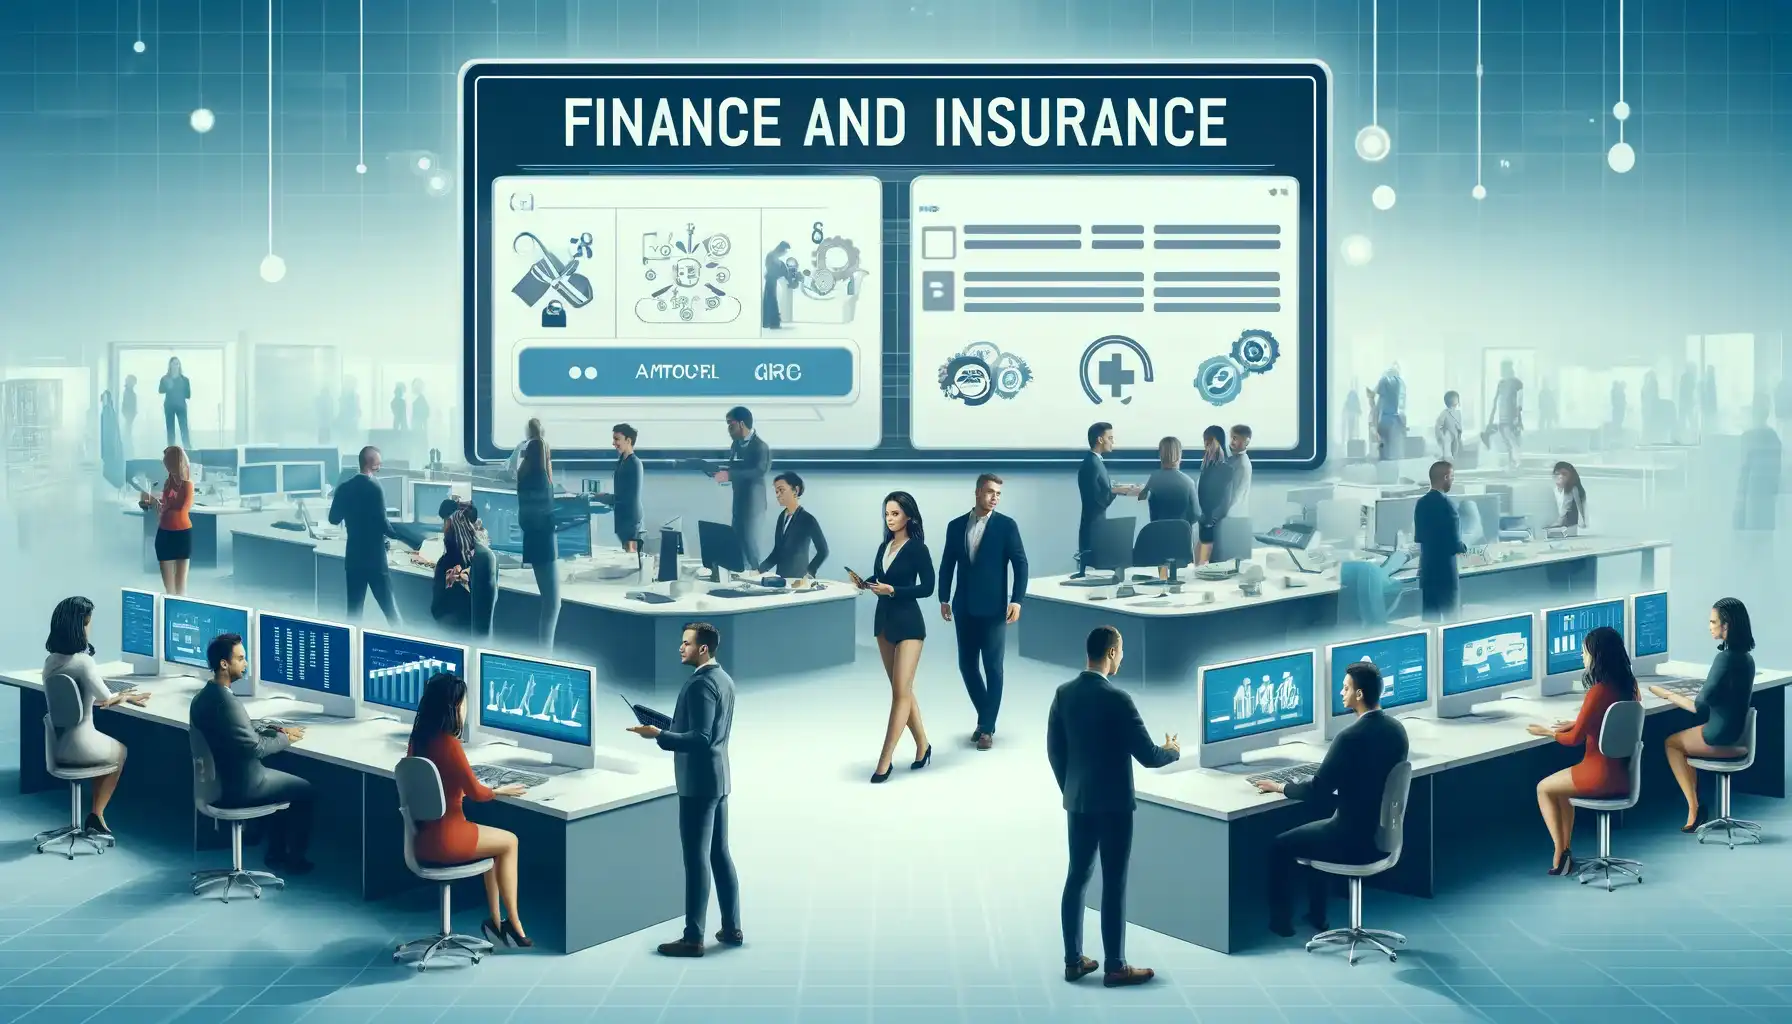 Streamlining Finance and Insurance Processes Image